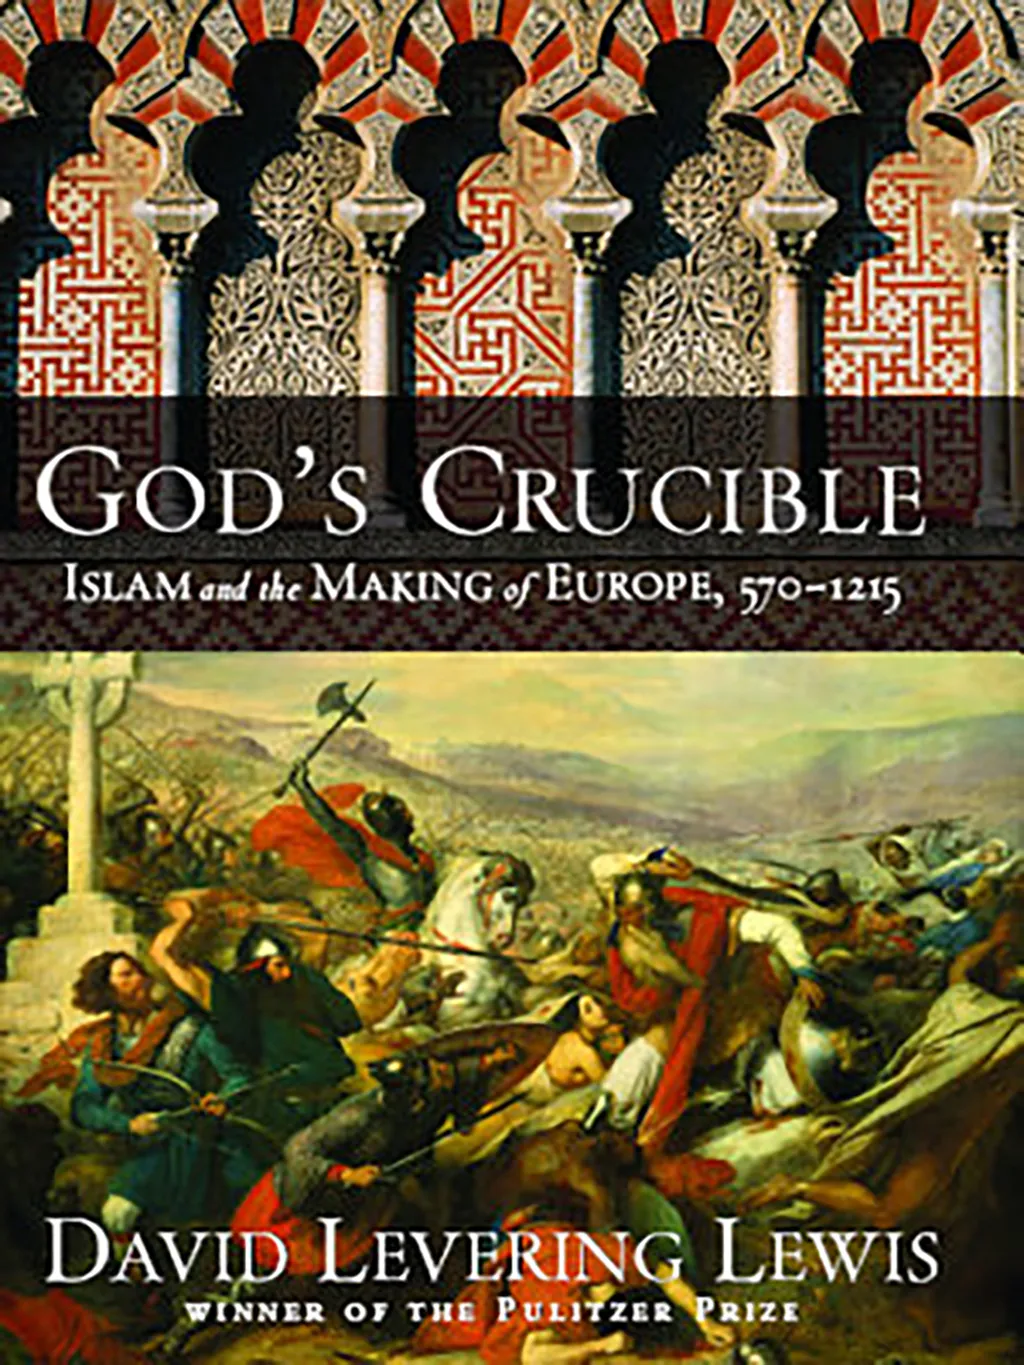 god's crucible, books every man should read